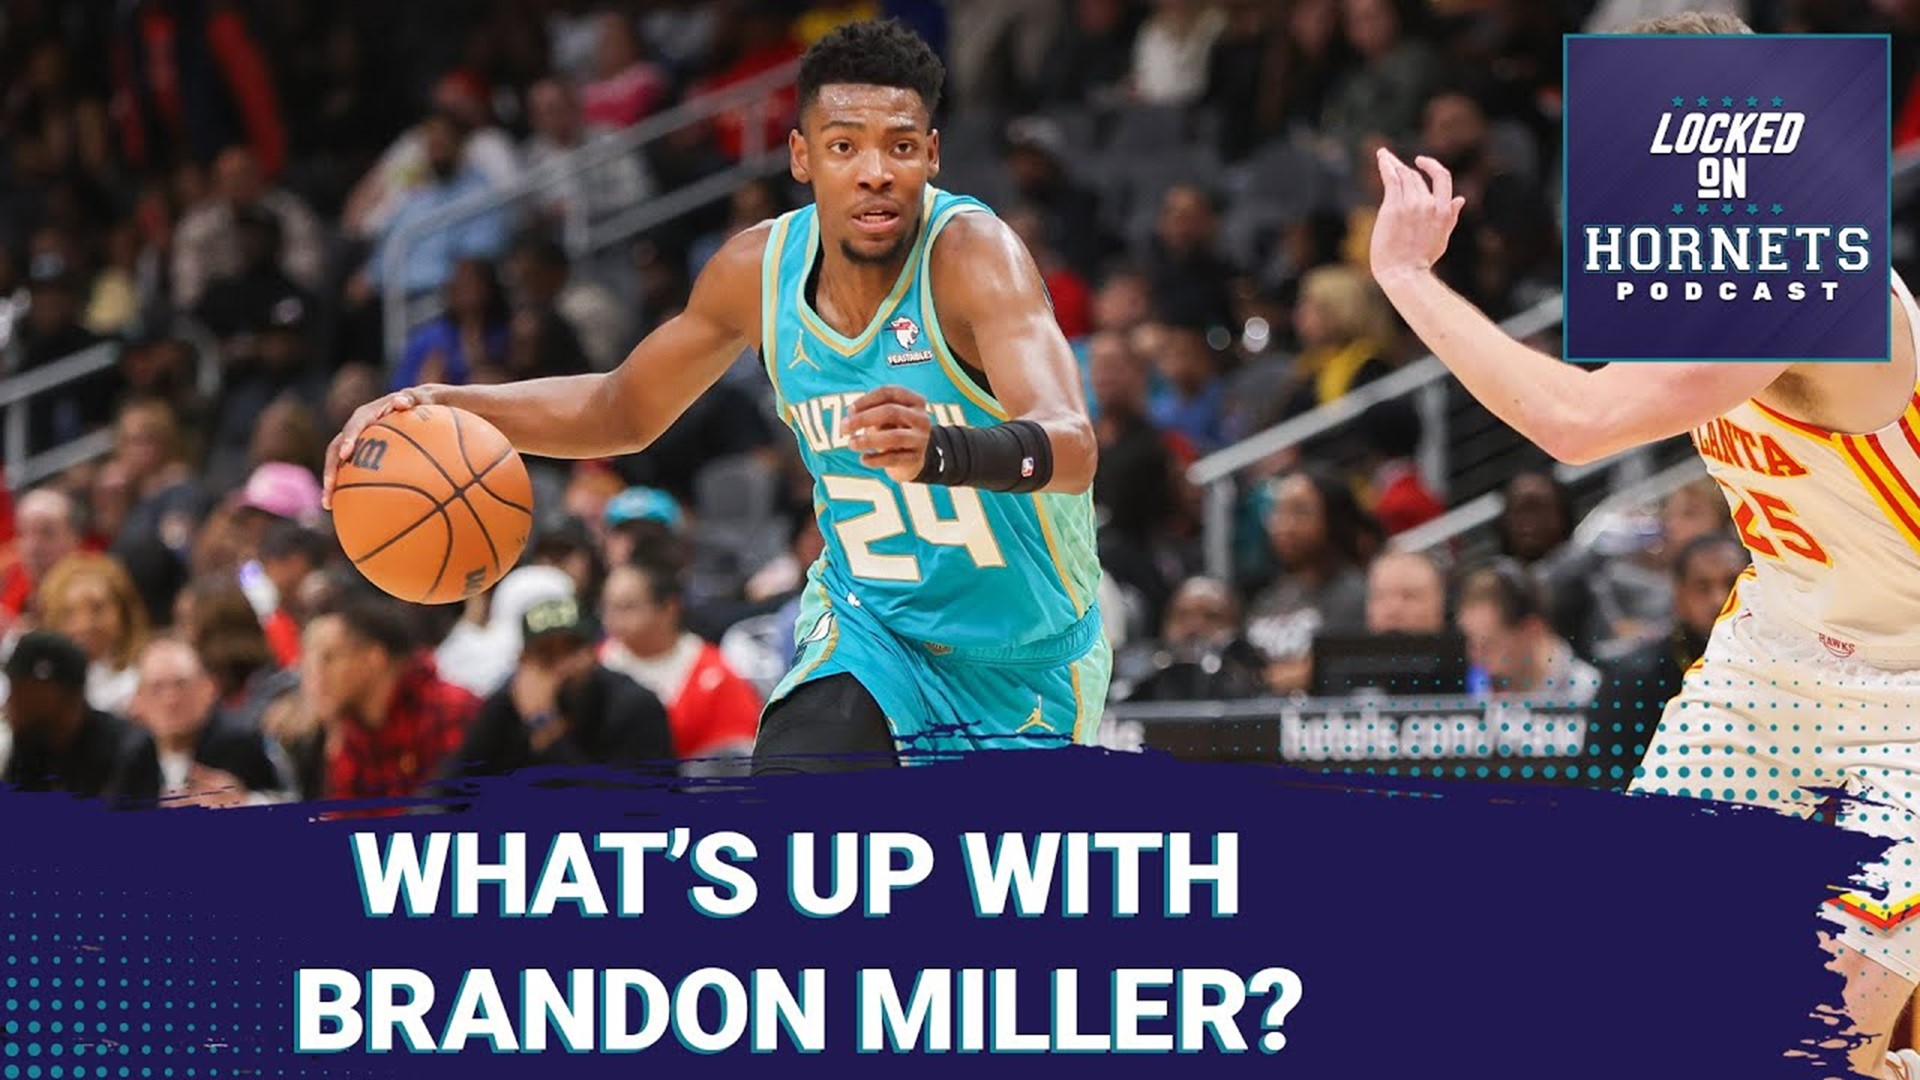 What's up with Brandon Miller? The Charlotte Hornets get blown out by the Hawks. Are they giving up?